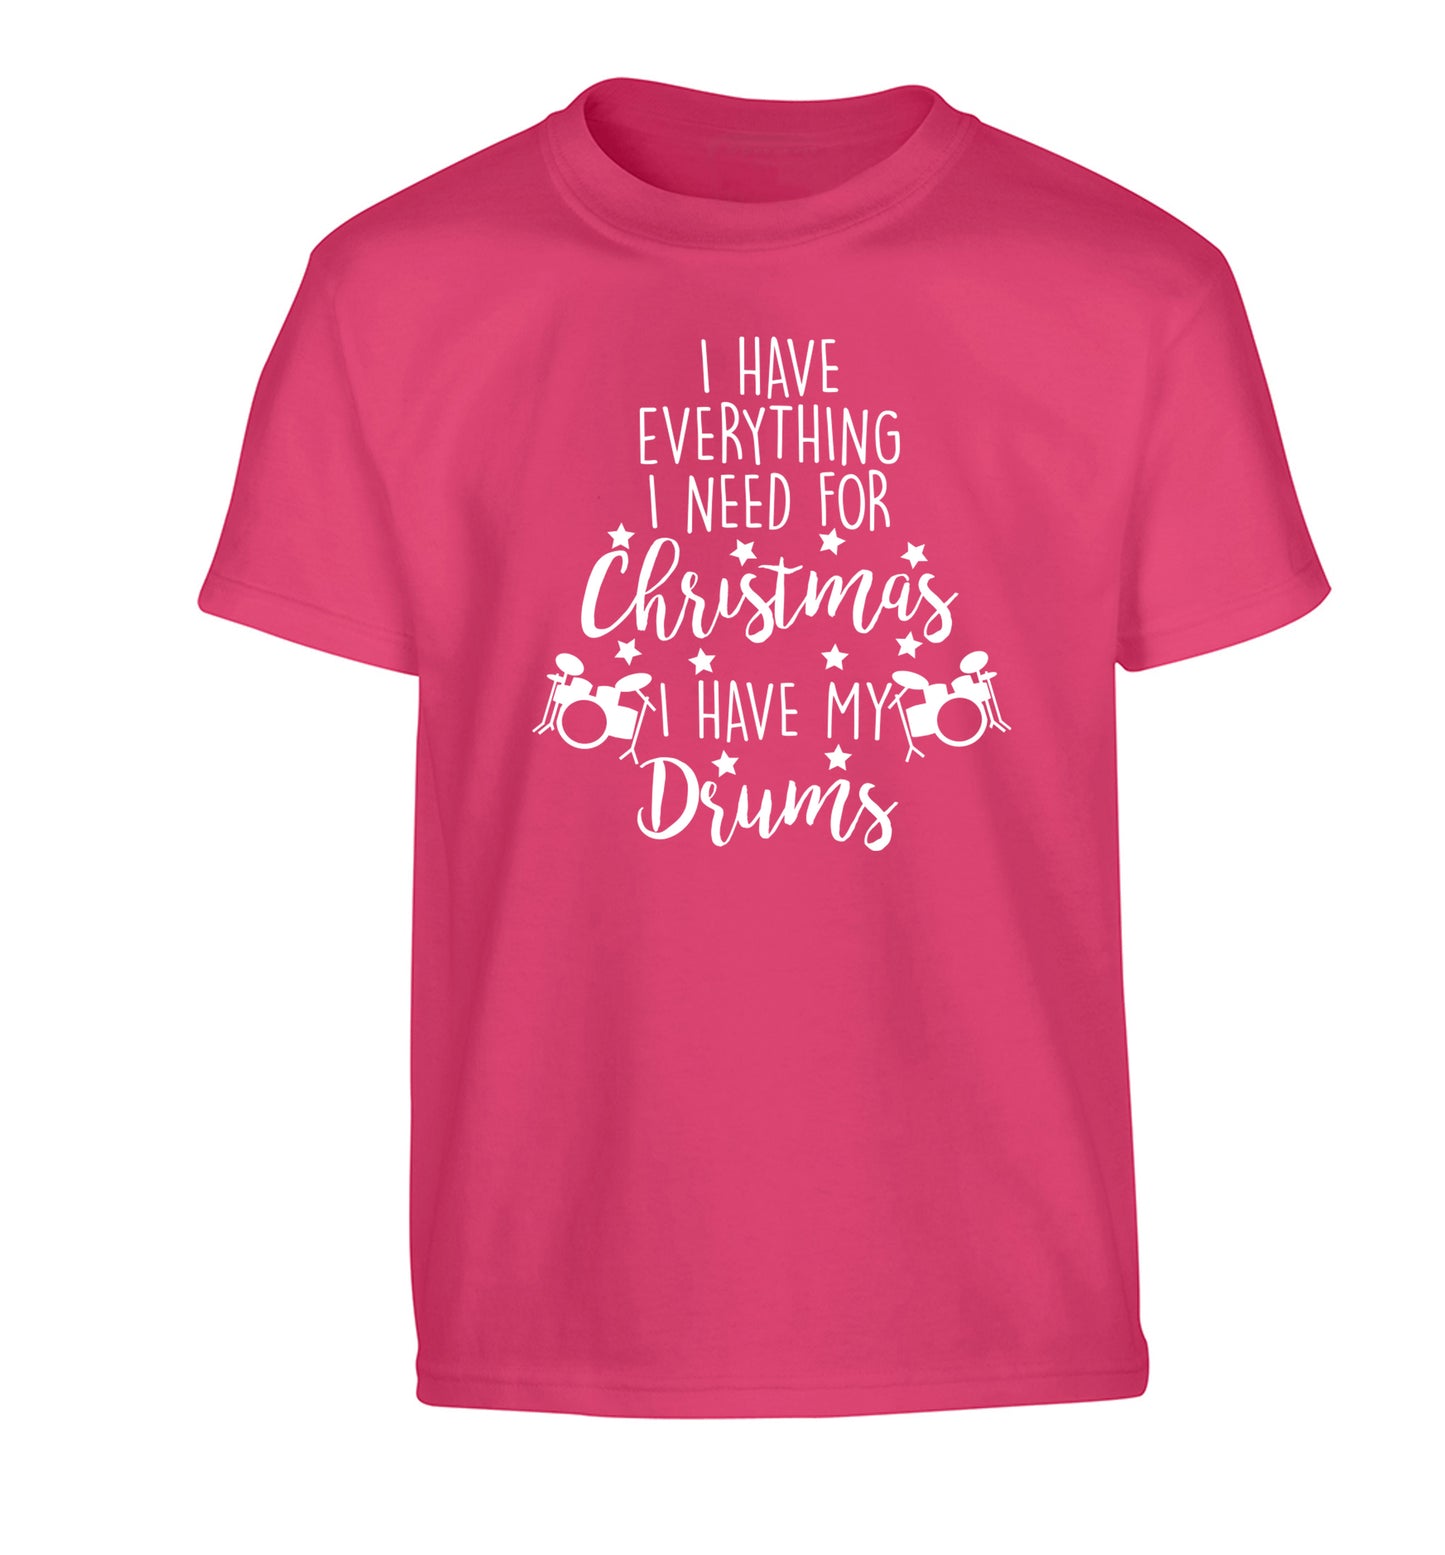 I have everything I need for Christmas I have my drums! Children's pink Tshirt 12-14 Years